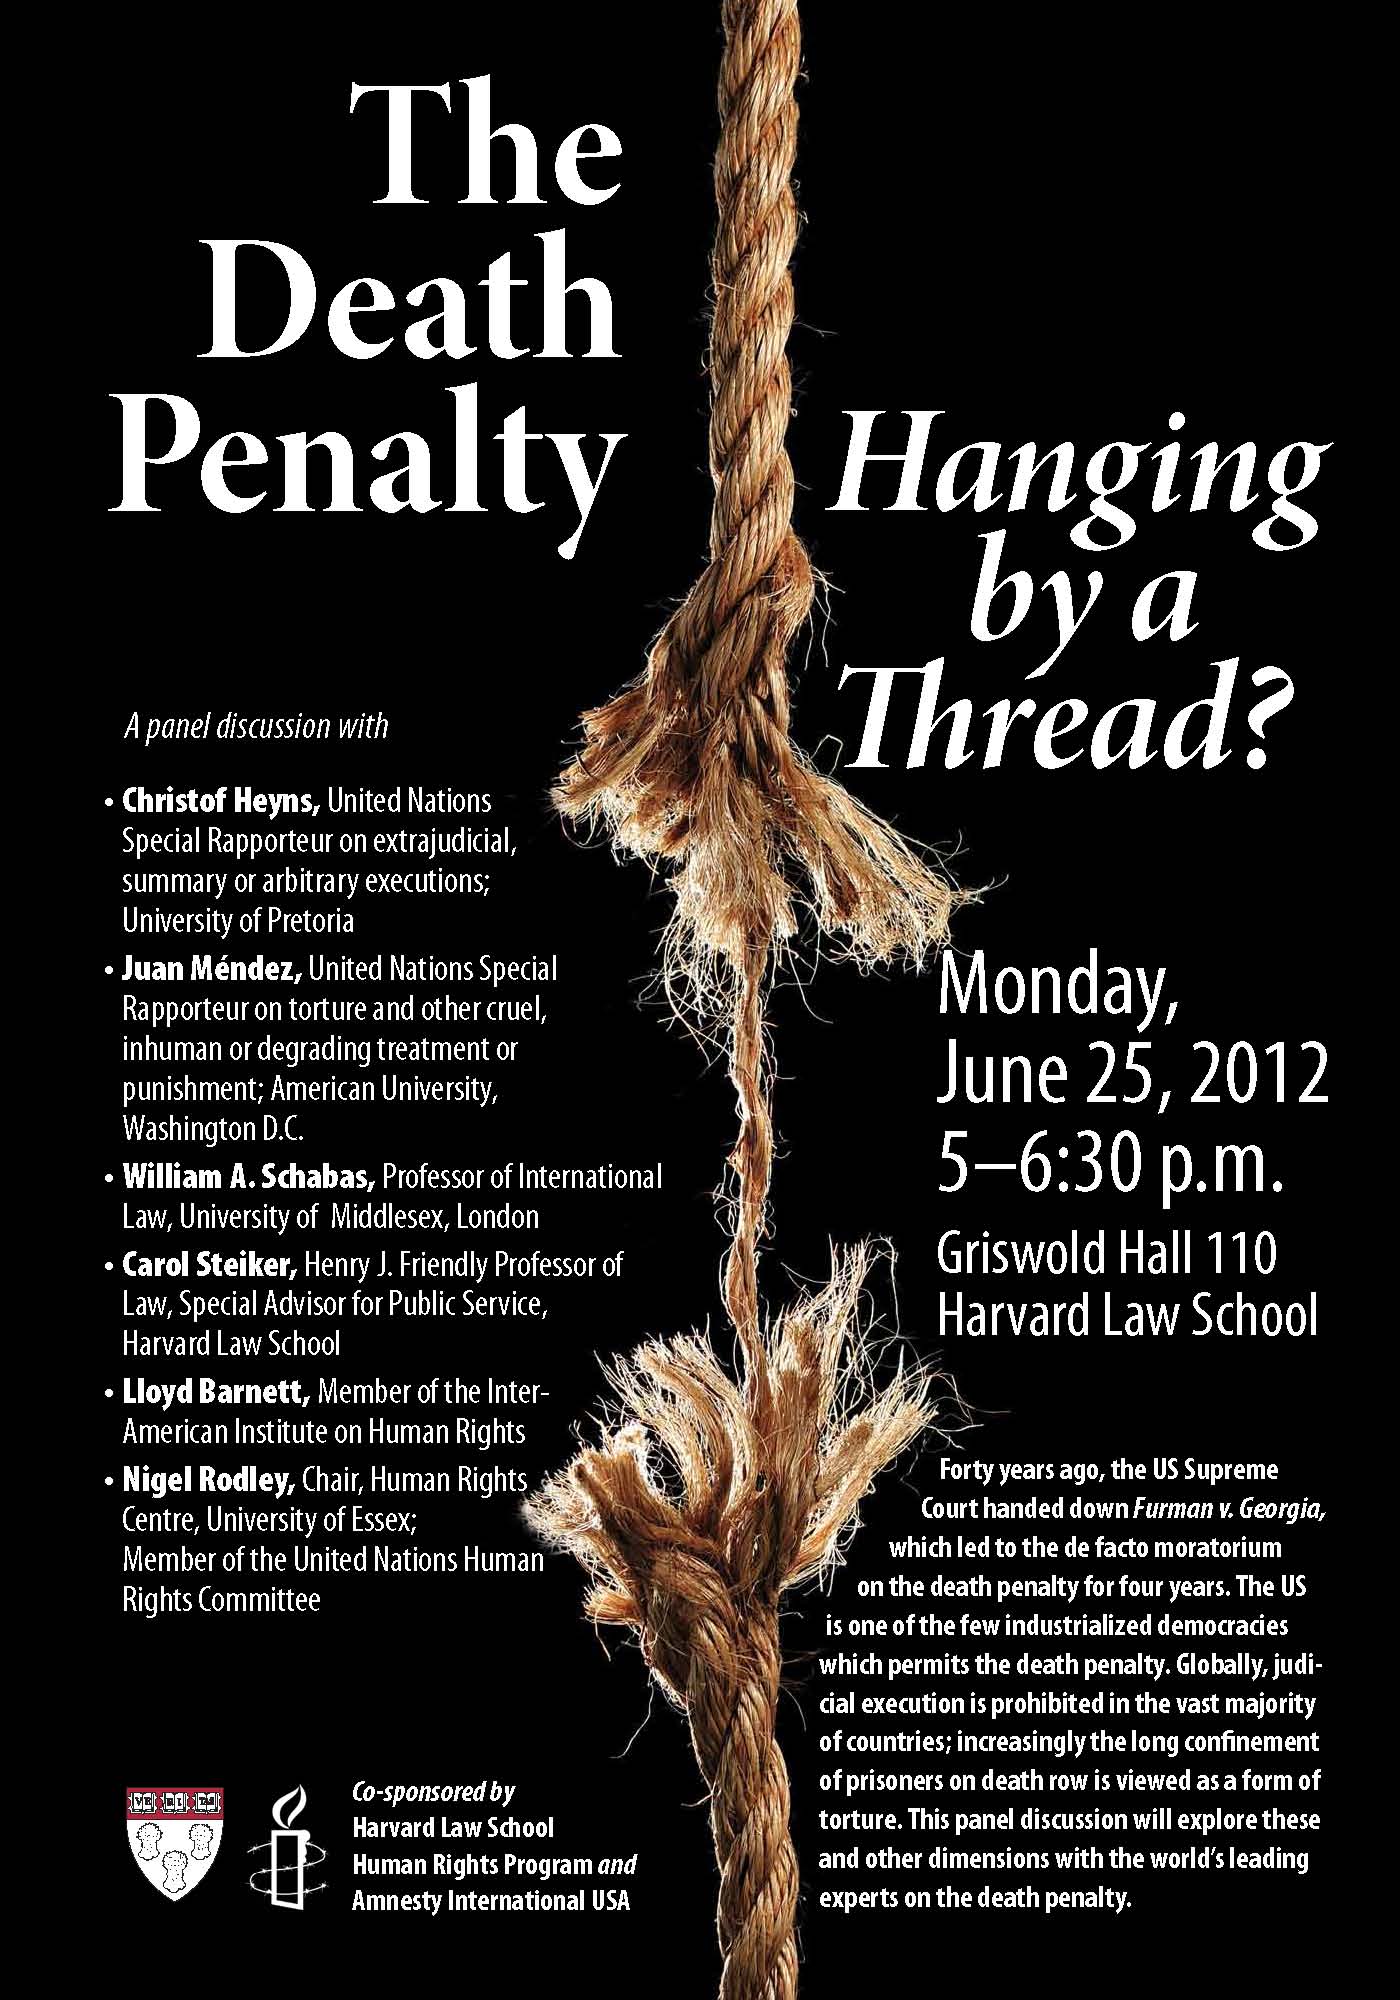 A rope being pulled apart in the center of the page along with event details for "The Death Penalty; Hanging by a Thread?" event.